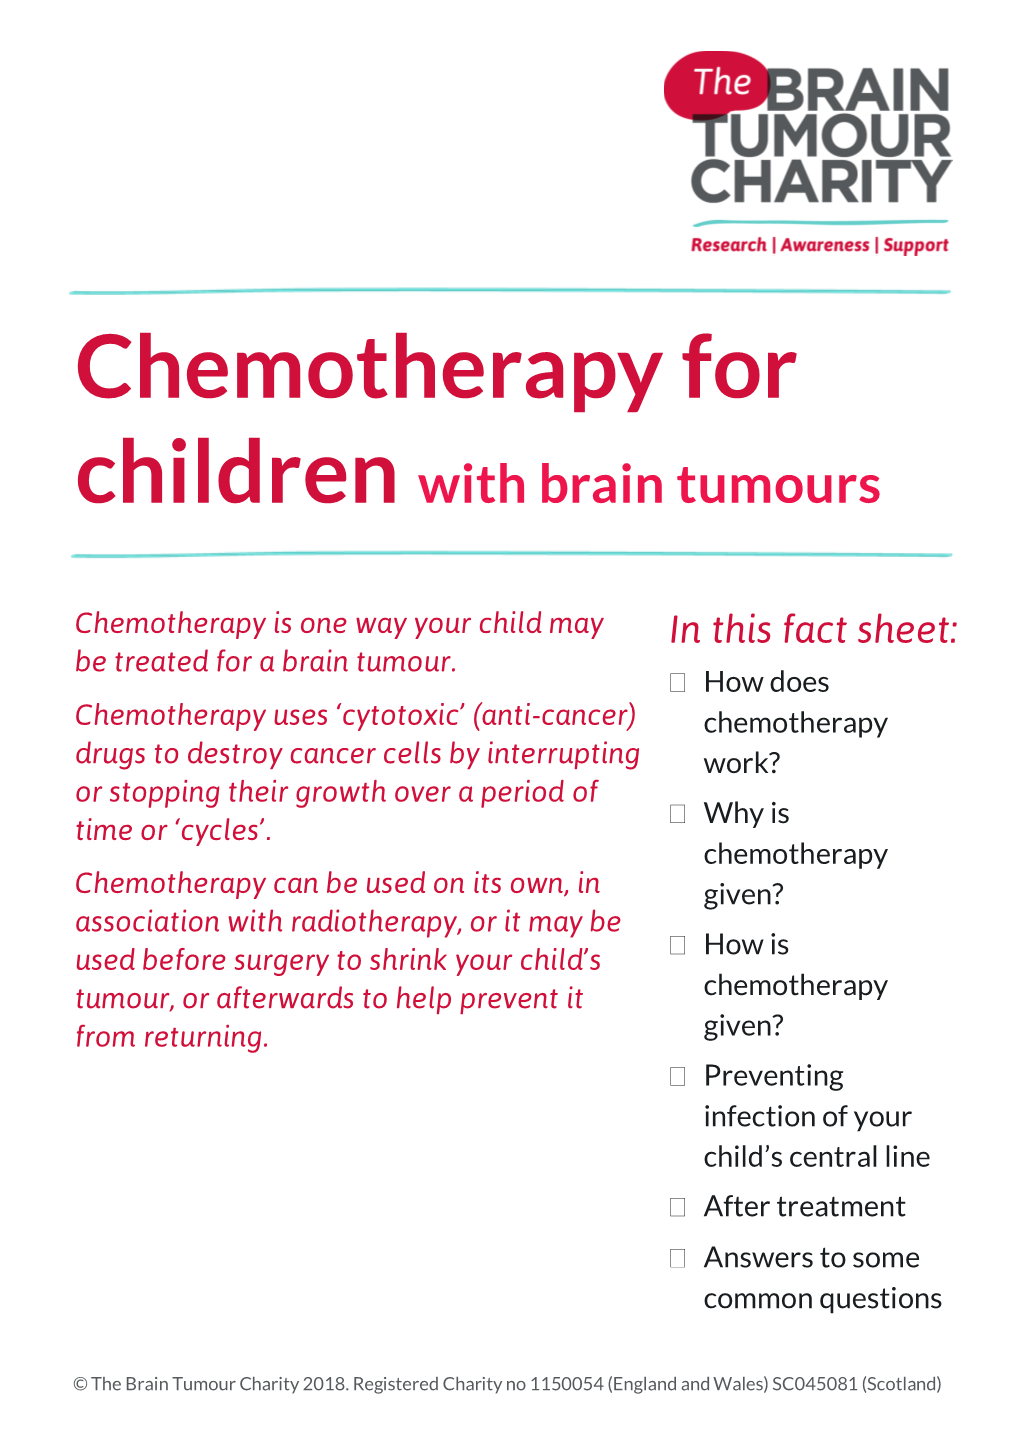 Chemotherapy for Children with Brain Tumours